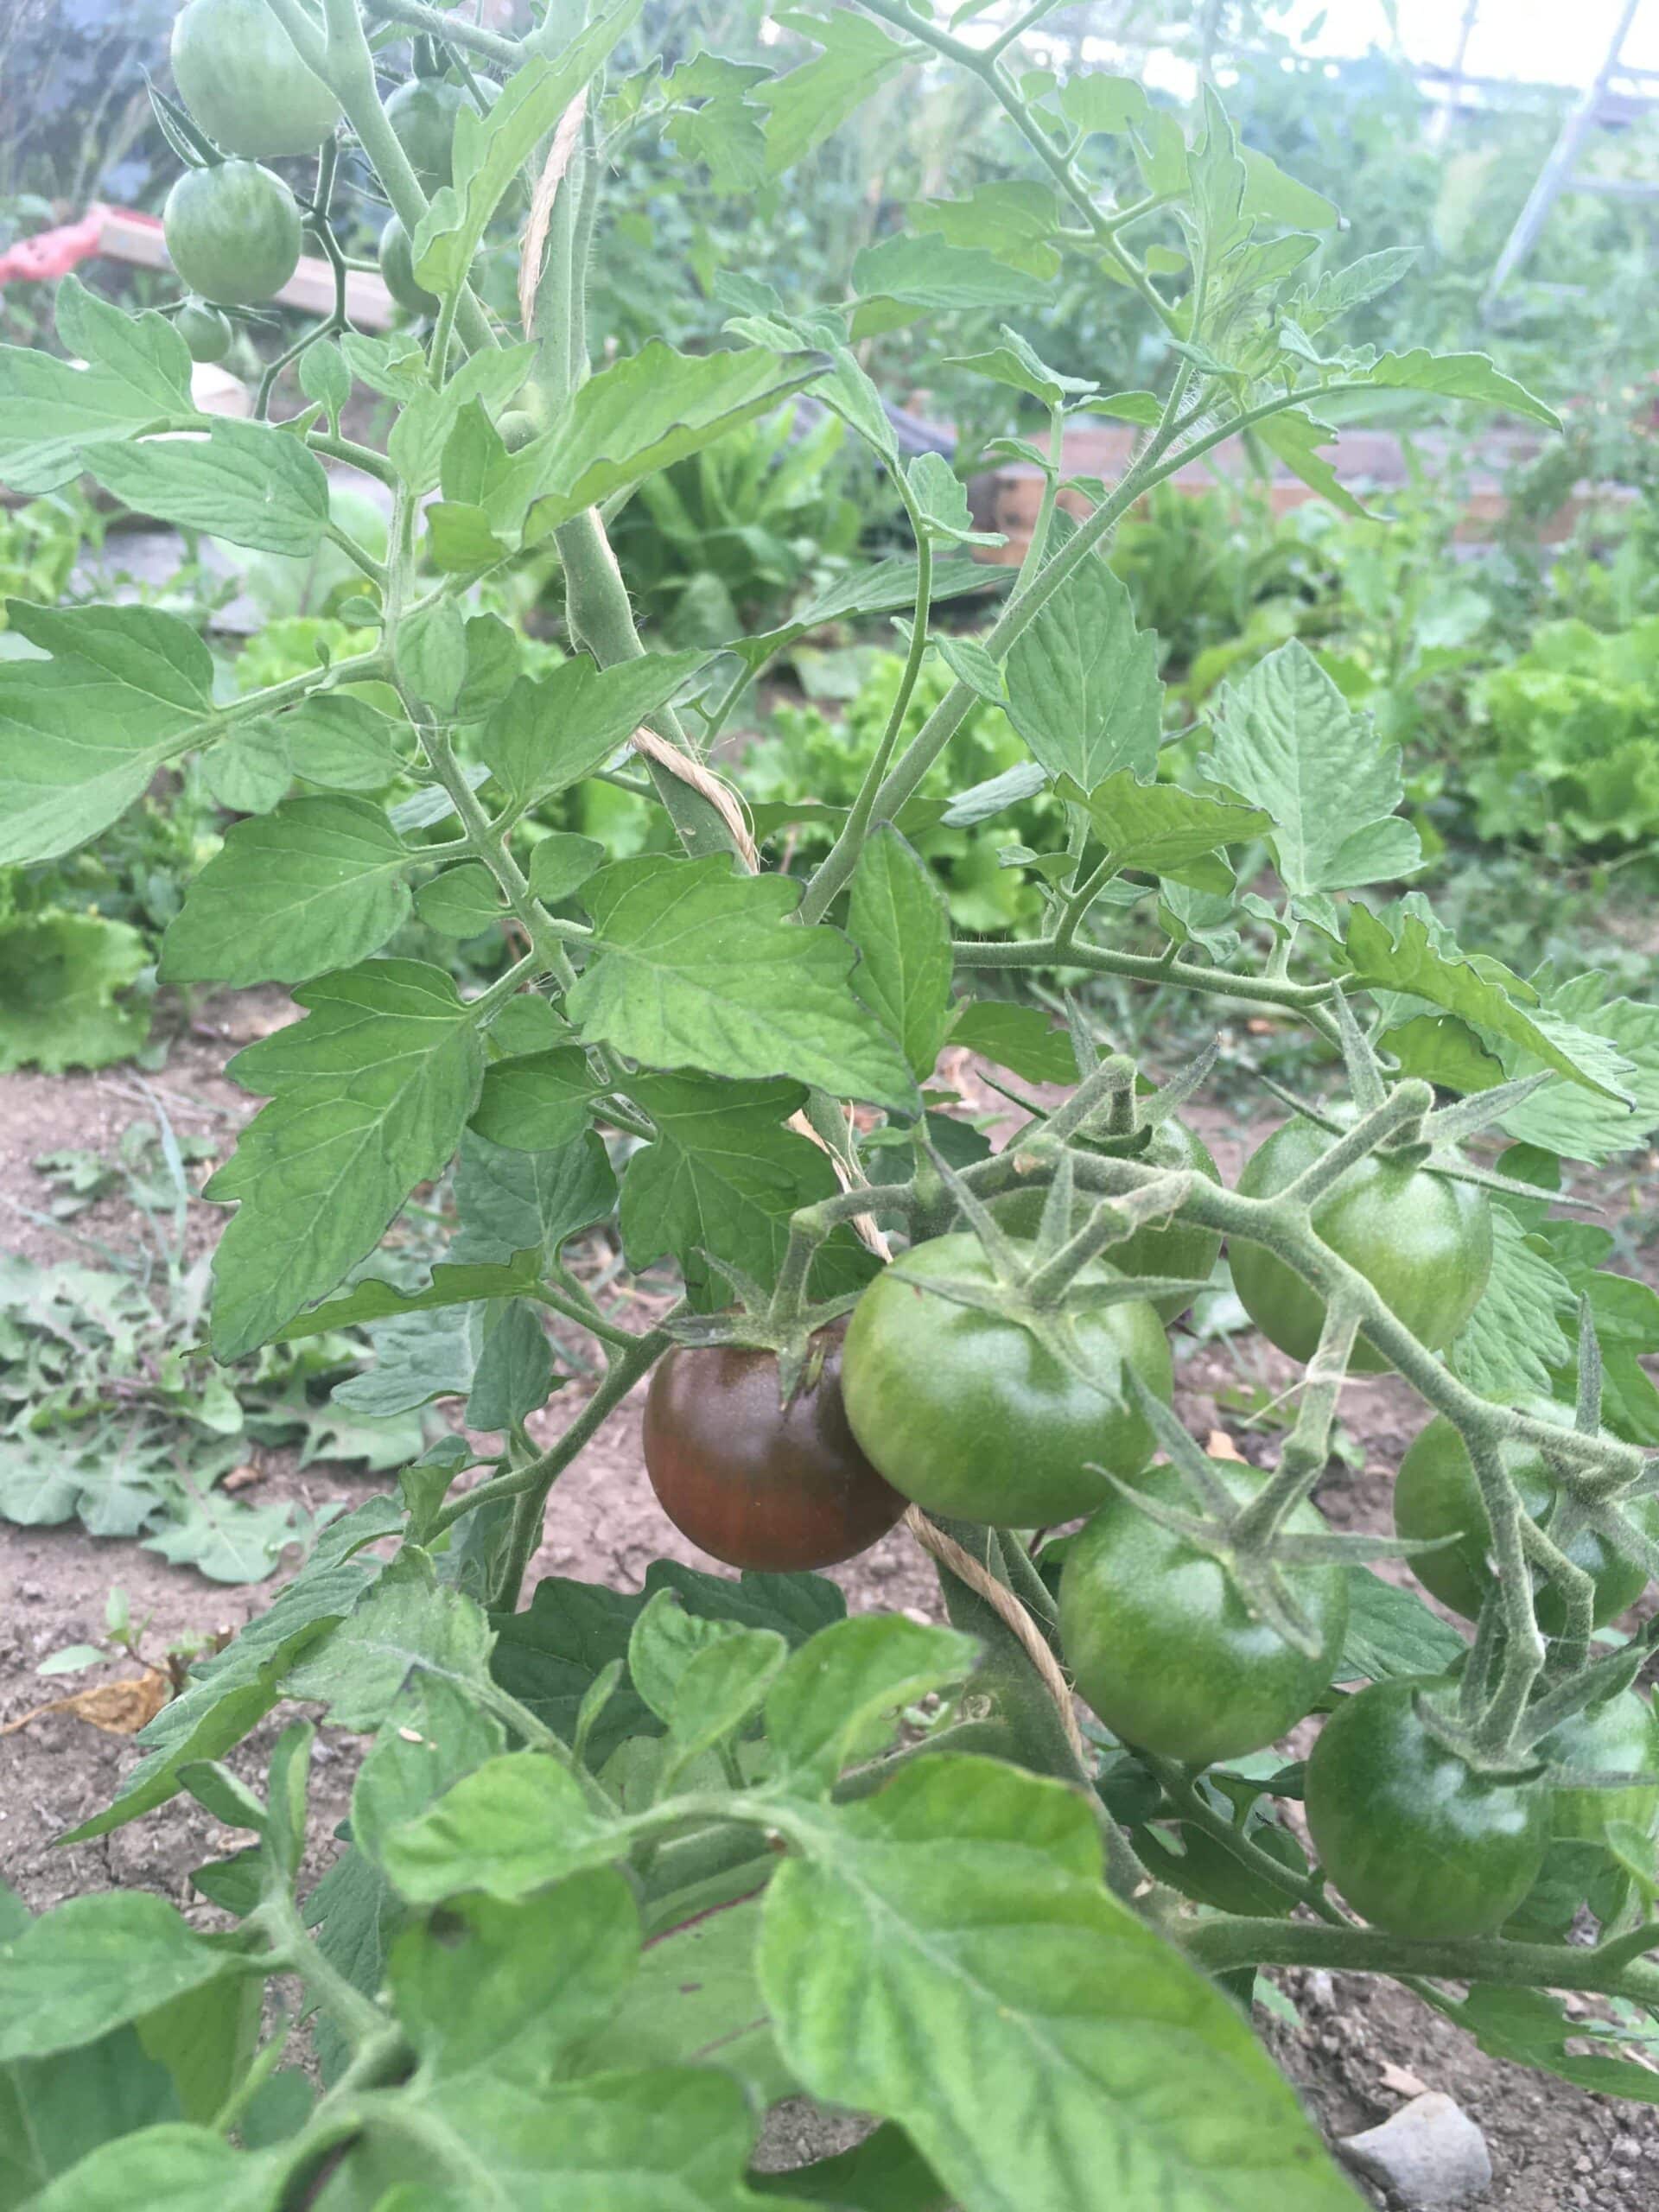 Tomaters!